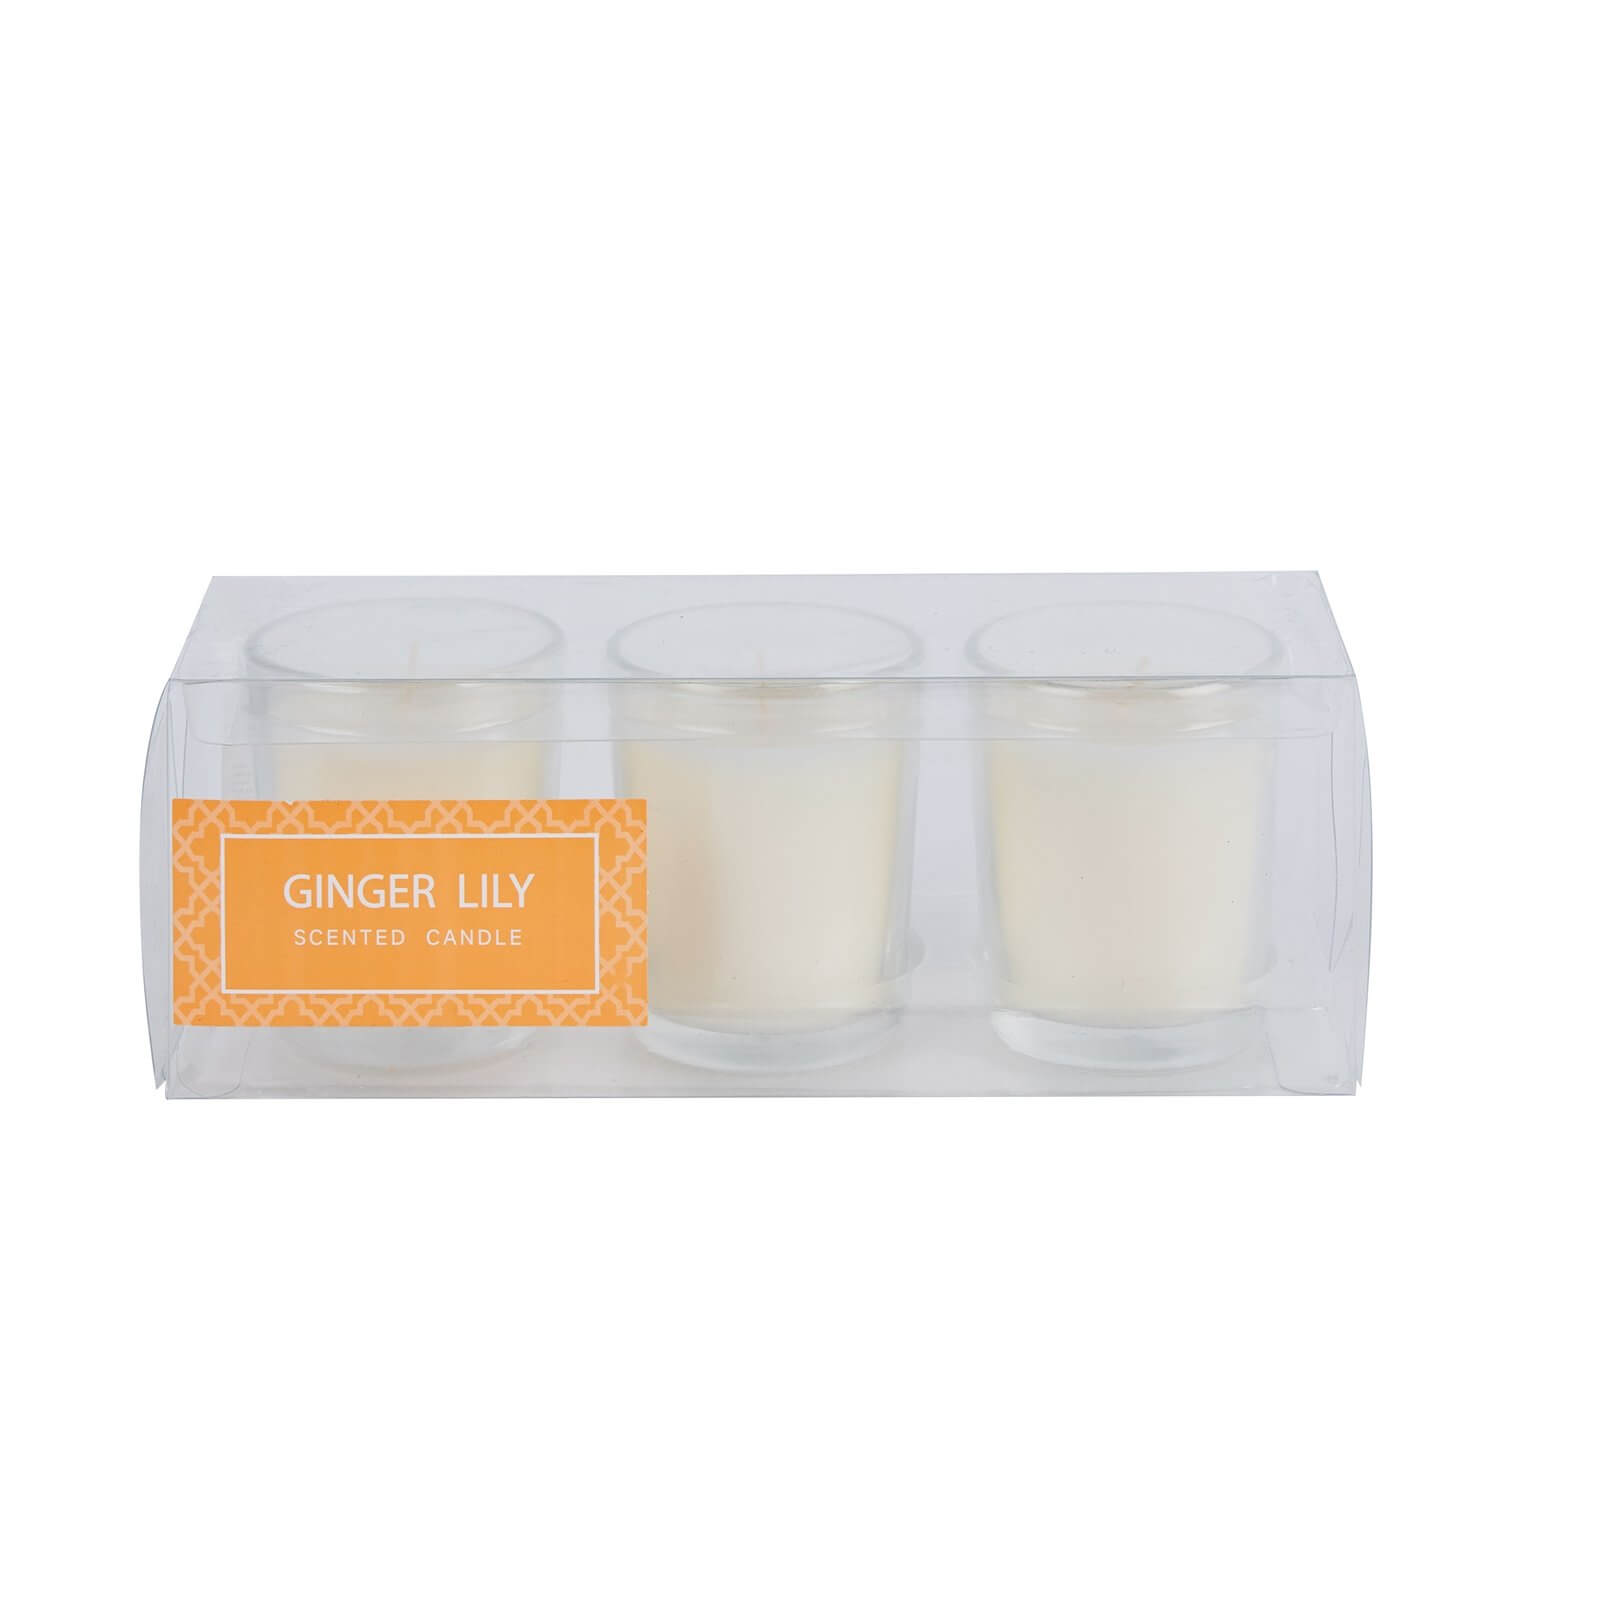 Ginger Lily Votive Candle - 3 Pack